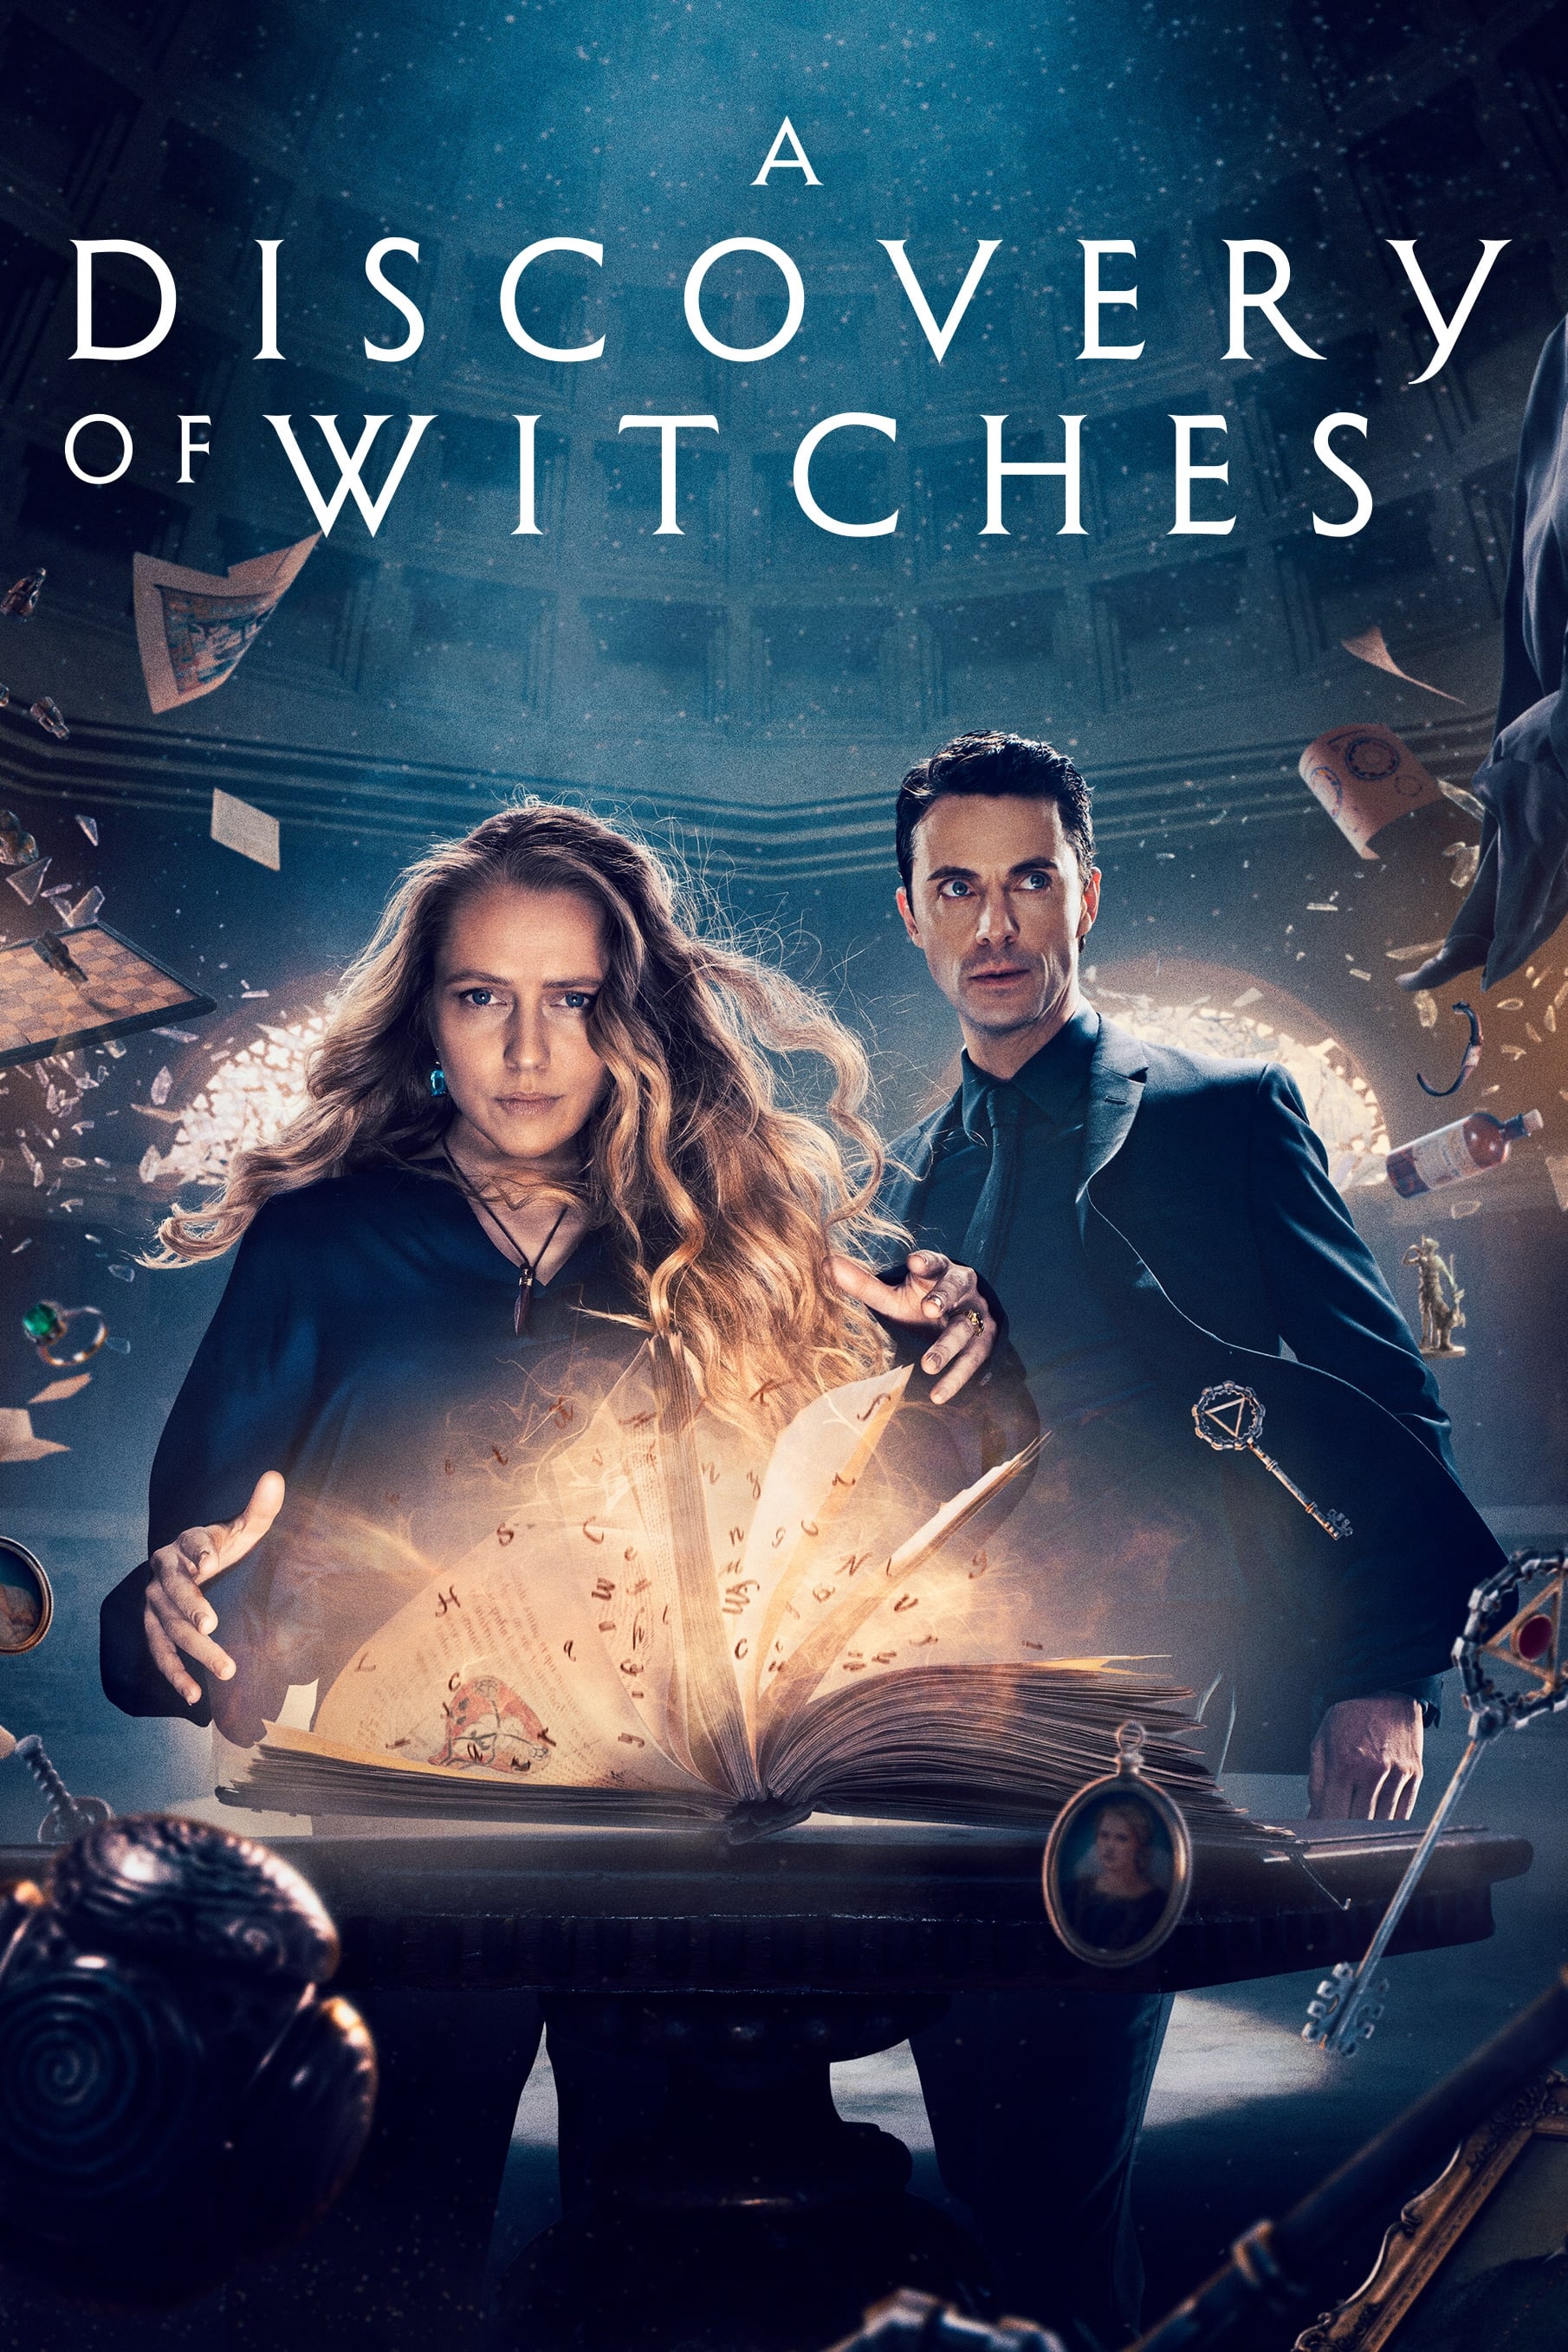 A Discovery of Witches TV Shows About Interspecies Romance